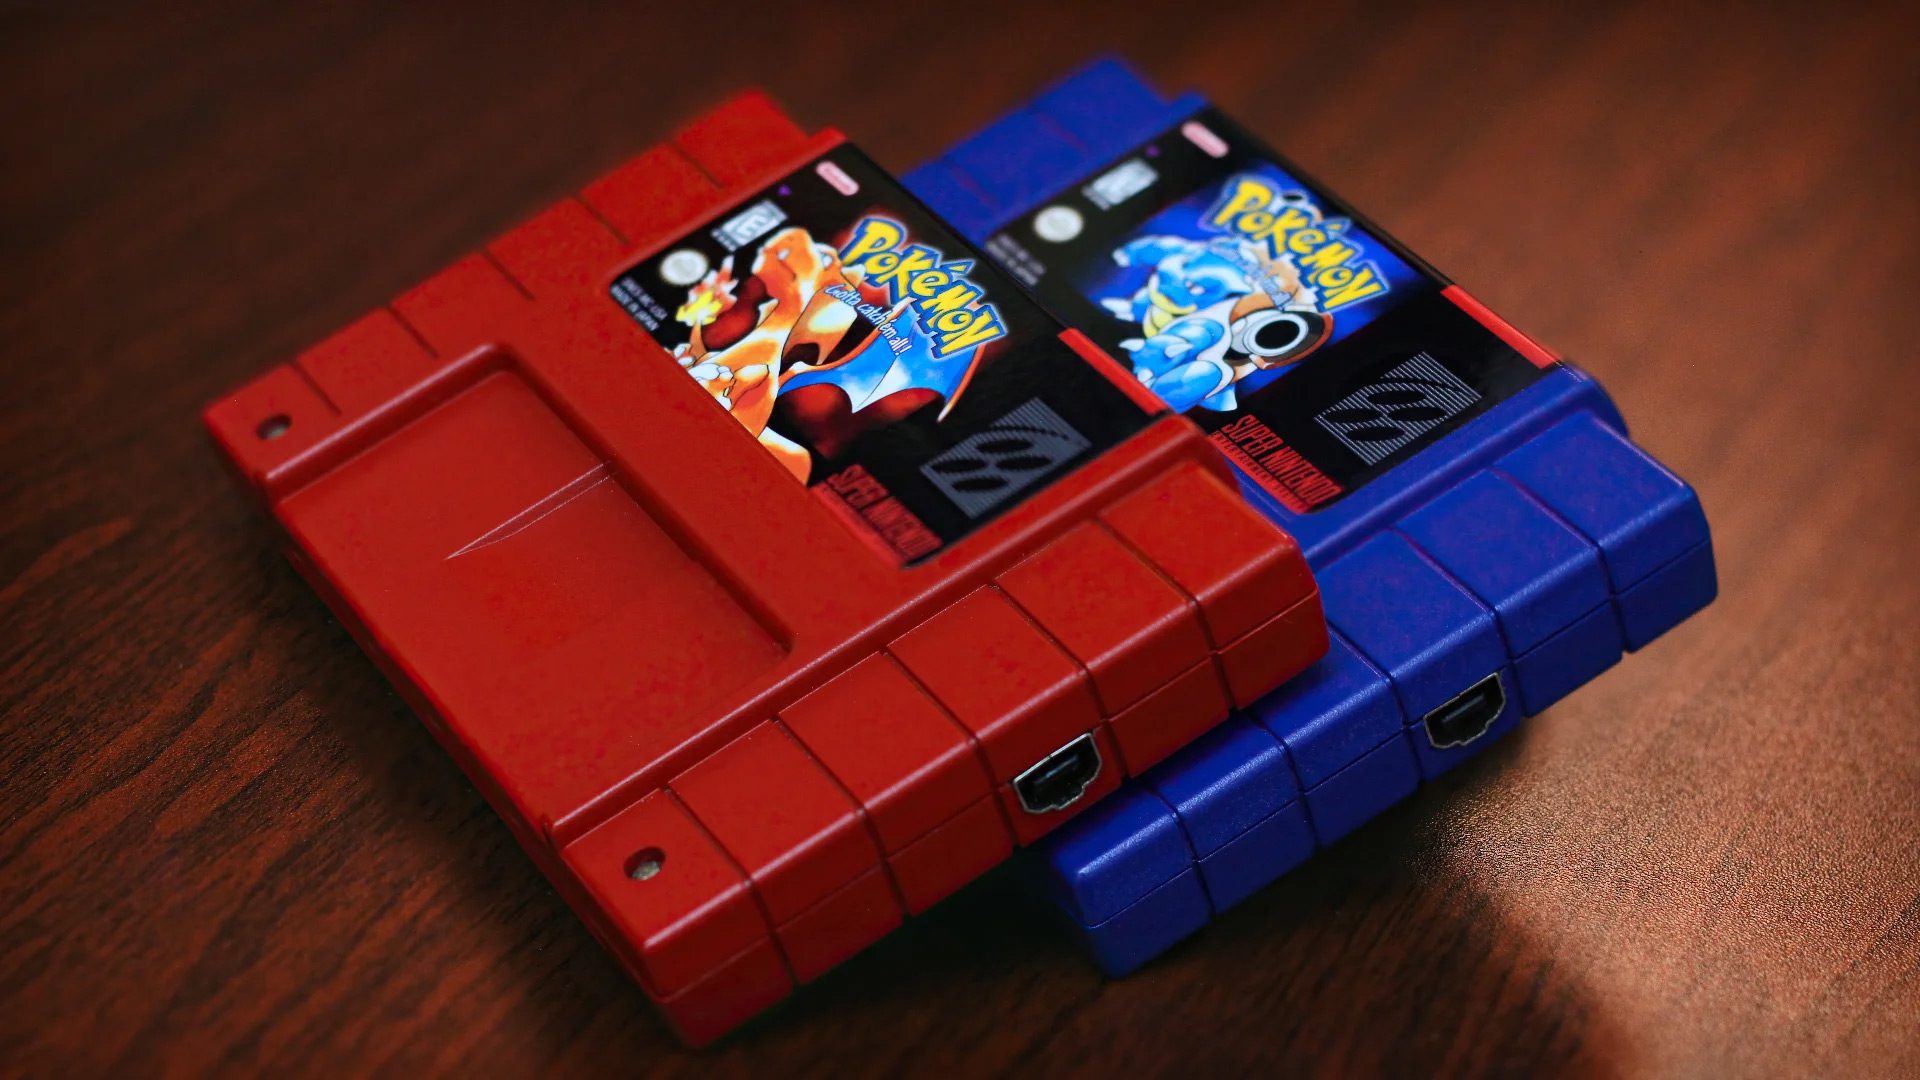 These Pokemon Red Blue SNES cartridges sure are sleek